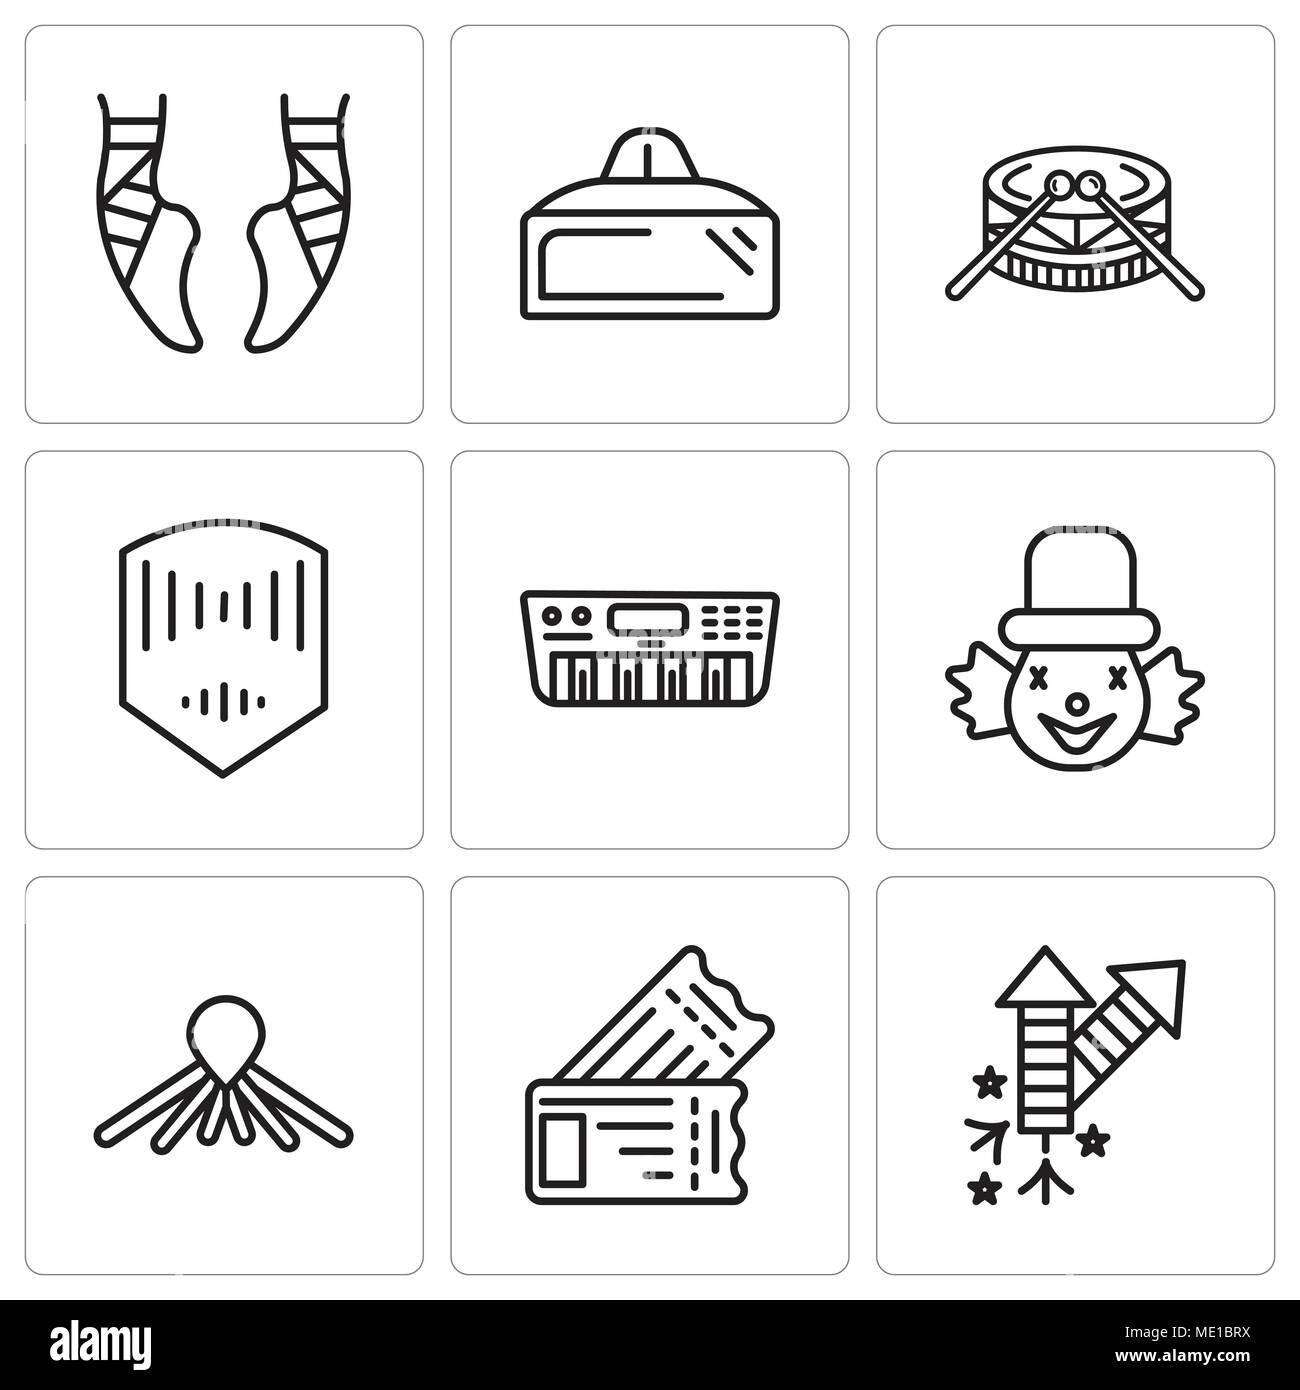 Set Of 9 simple editable icons such as Fireworks, Tickets, Balloon dog, Clown, Synthesizer, Mask, Drums, Vr glasses, Ballet, can be used for mobile, w Stock Vector